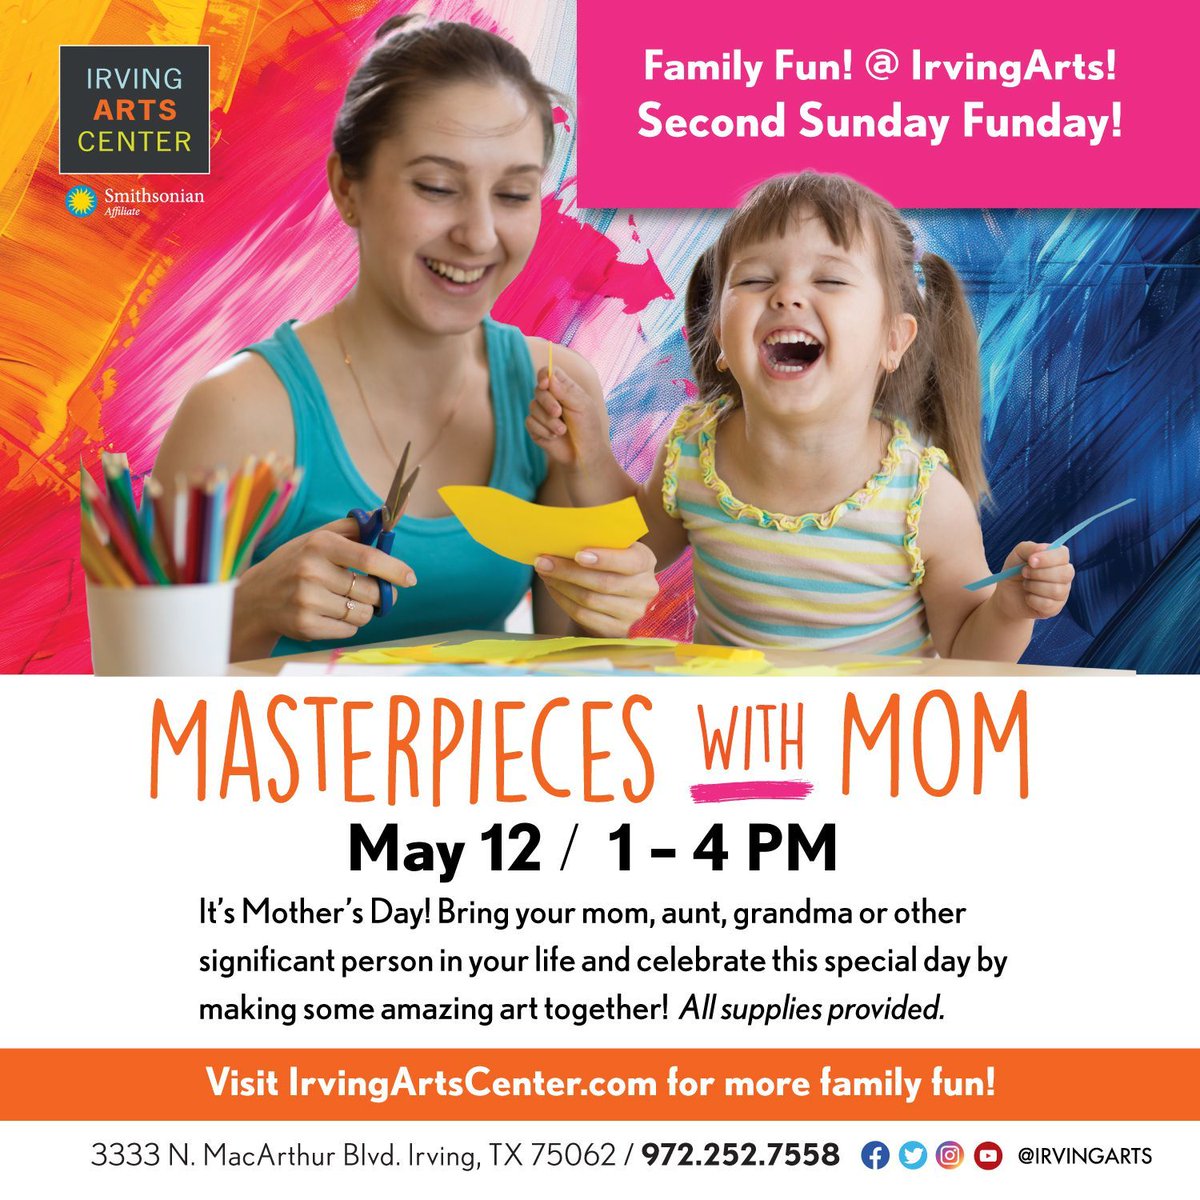 Mama! Come enjoy family arts and crafts at the art center to celebrate YOU and all you do for our family! #mamasday #mothersday #2ndsunday #familyart #kidsart #familyfun #irvingtx #irvingarts